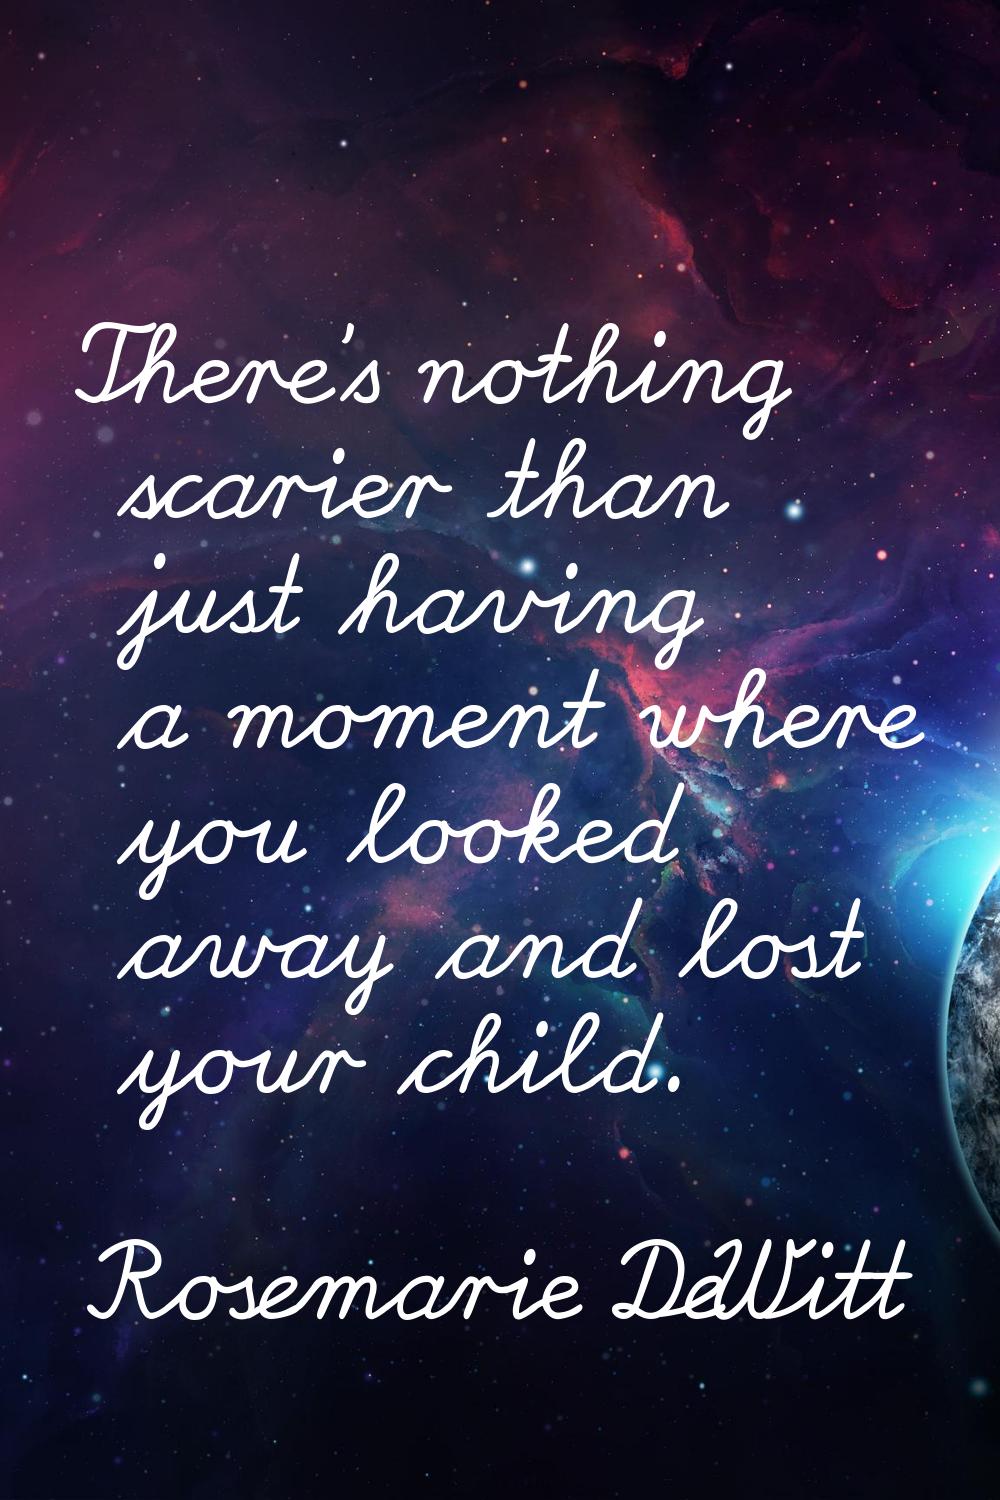 There's nothing scarier than just having a moment where you looked away and lost your child.